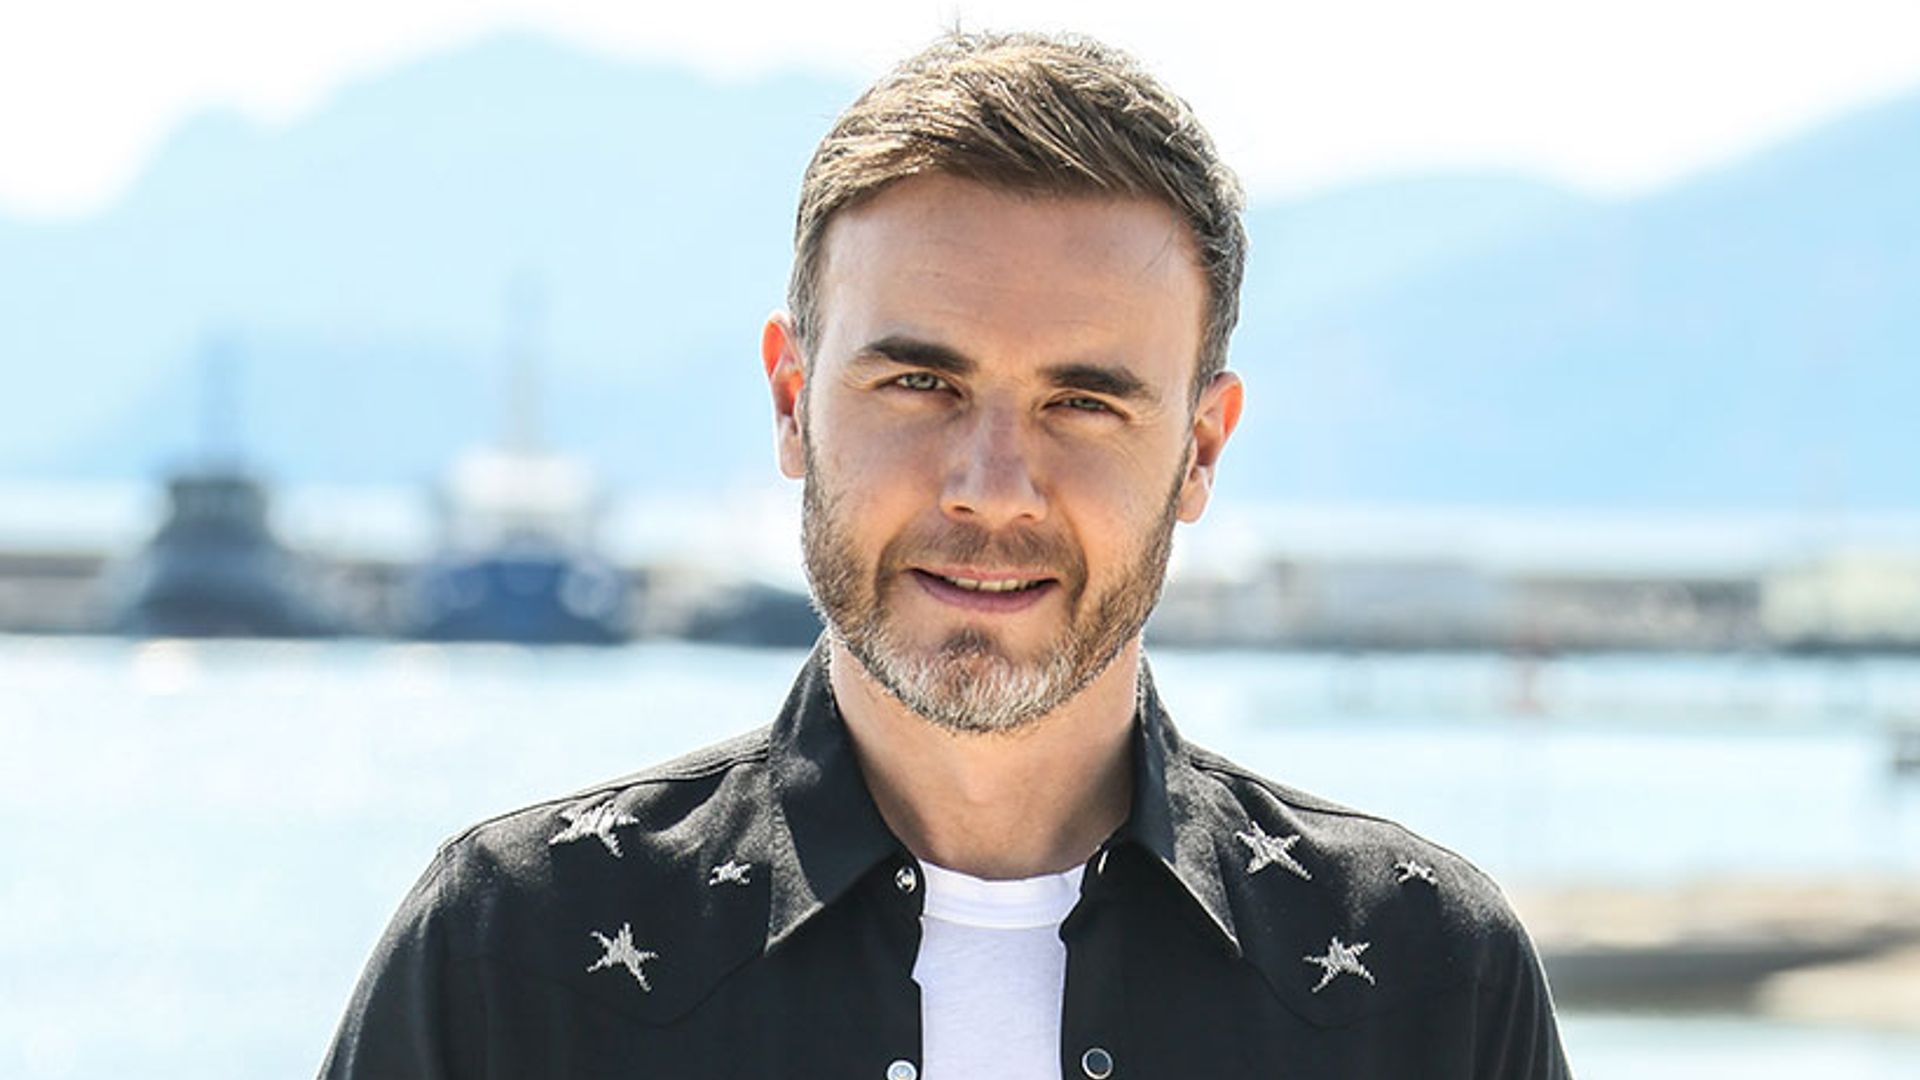 Gary Barlow and lookalike son Daniel pose shirtless in rare photo together